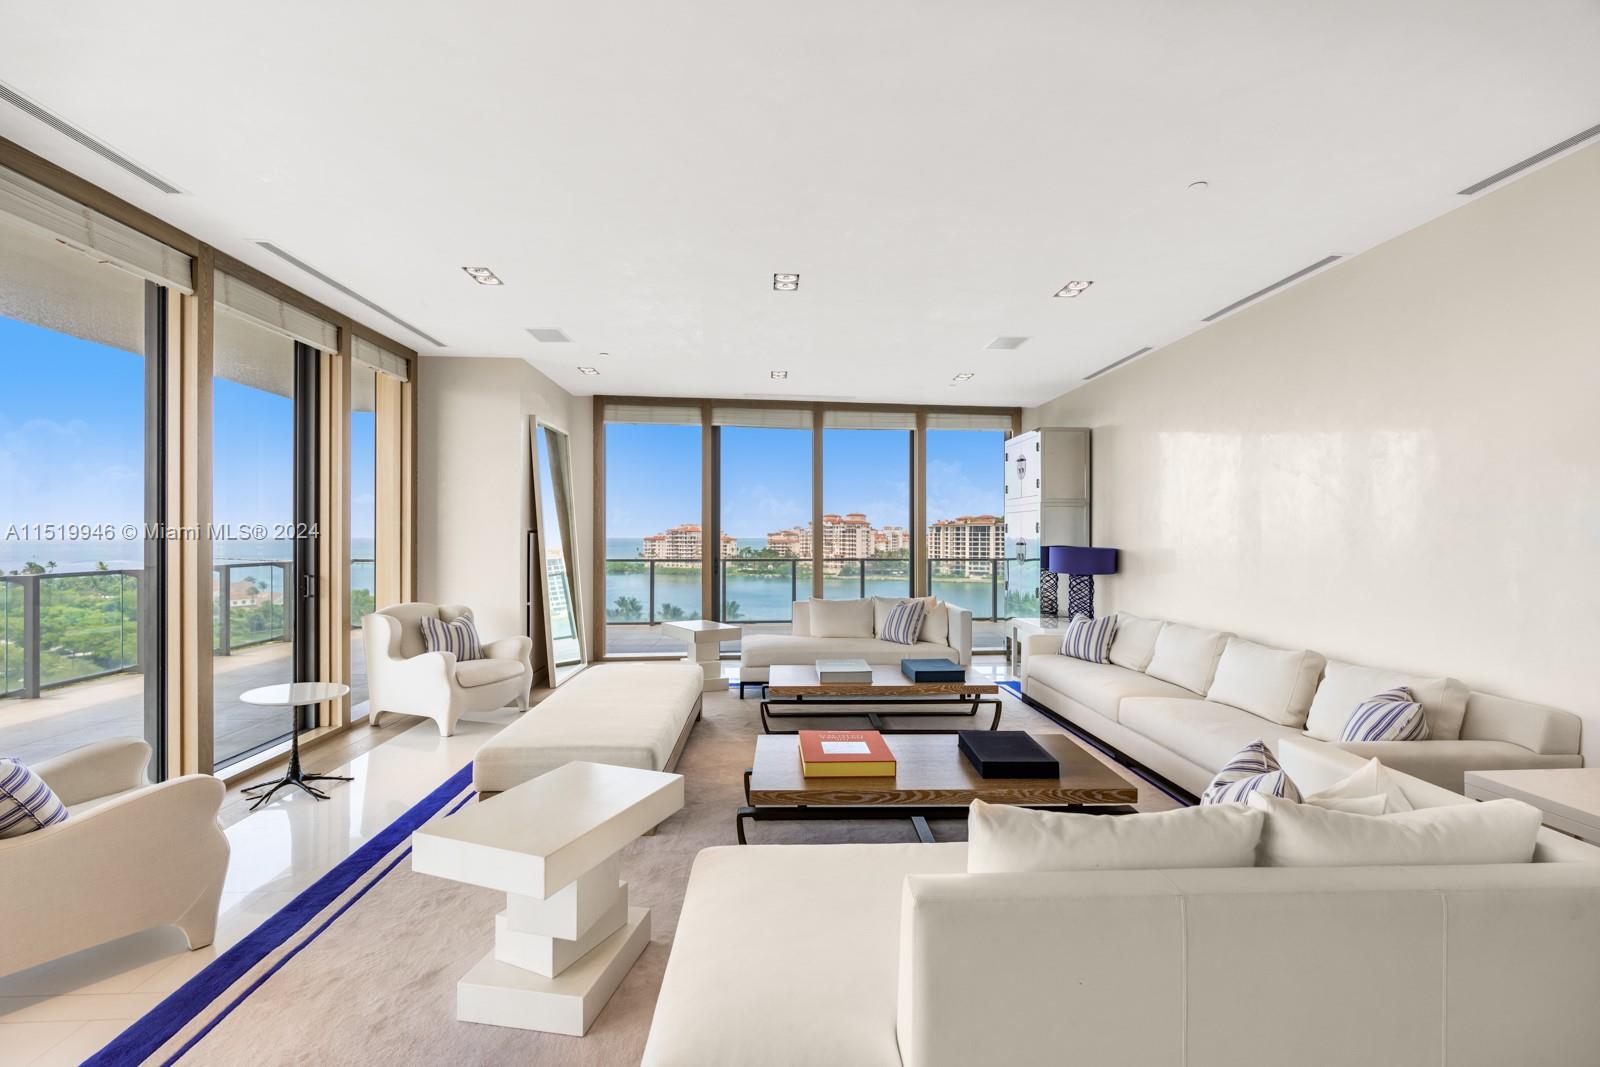 Designed by renowned Luis Bustamante, this turn-key residence at the exclusive Apogee features furniture &amp; lighting fixtures by Christian Liaigre, Promemoria, and Van der Stratten and offers an elevated living experience with views of the Ocean, Fisher Island, and city skyline. Upon entering, you&#039;ll be greeted by an open &amp; airy floor plan that includes 4 BD/3.5 BA and an enclosed Media Room. The gourmet kitchen features top-of-the-line appliances and access to a gas grill on the terrace. Apogee offers world-class amenities, including a fitness center, pool, &amp; 24-hour concierge, ensuring your comfort &amp; security at all times. Located in the highly sought-after South of Fifth neighborhood, this residence is just steps away from some of Miami&#039;s finest dining destinations.